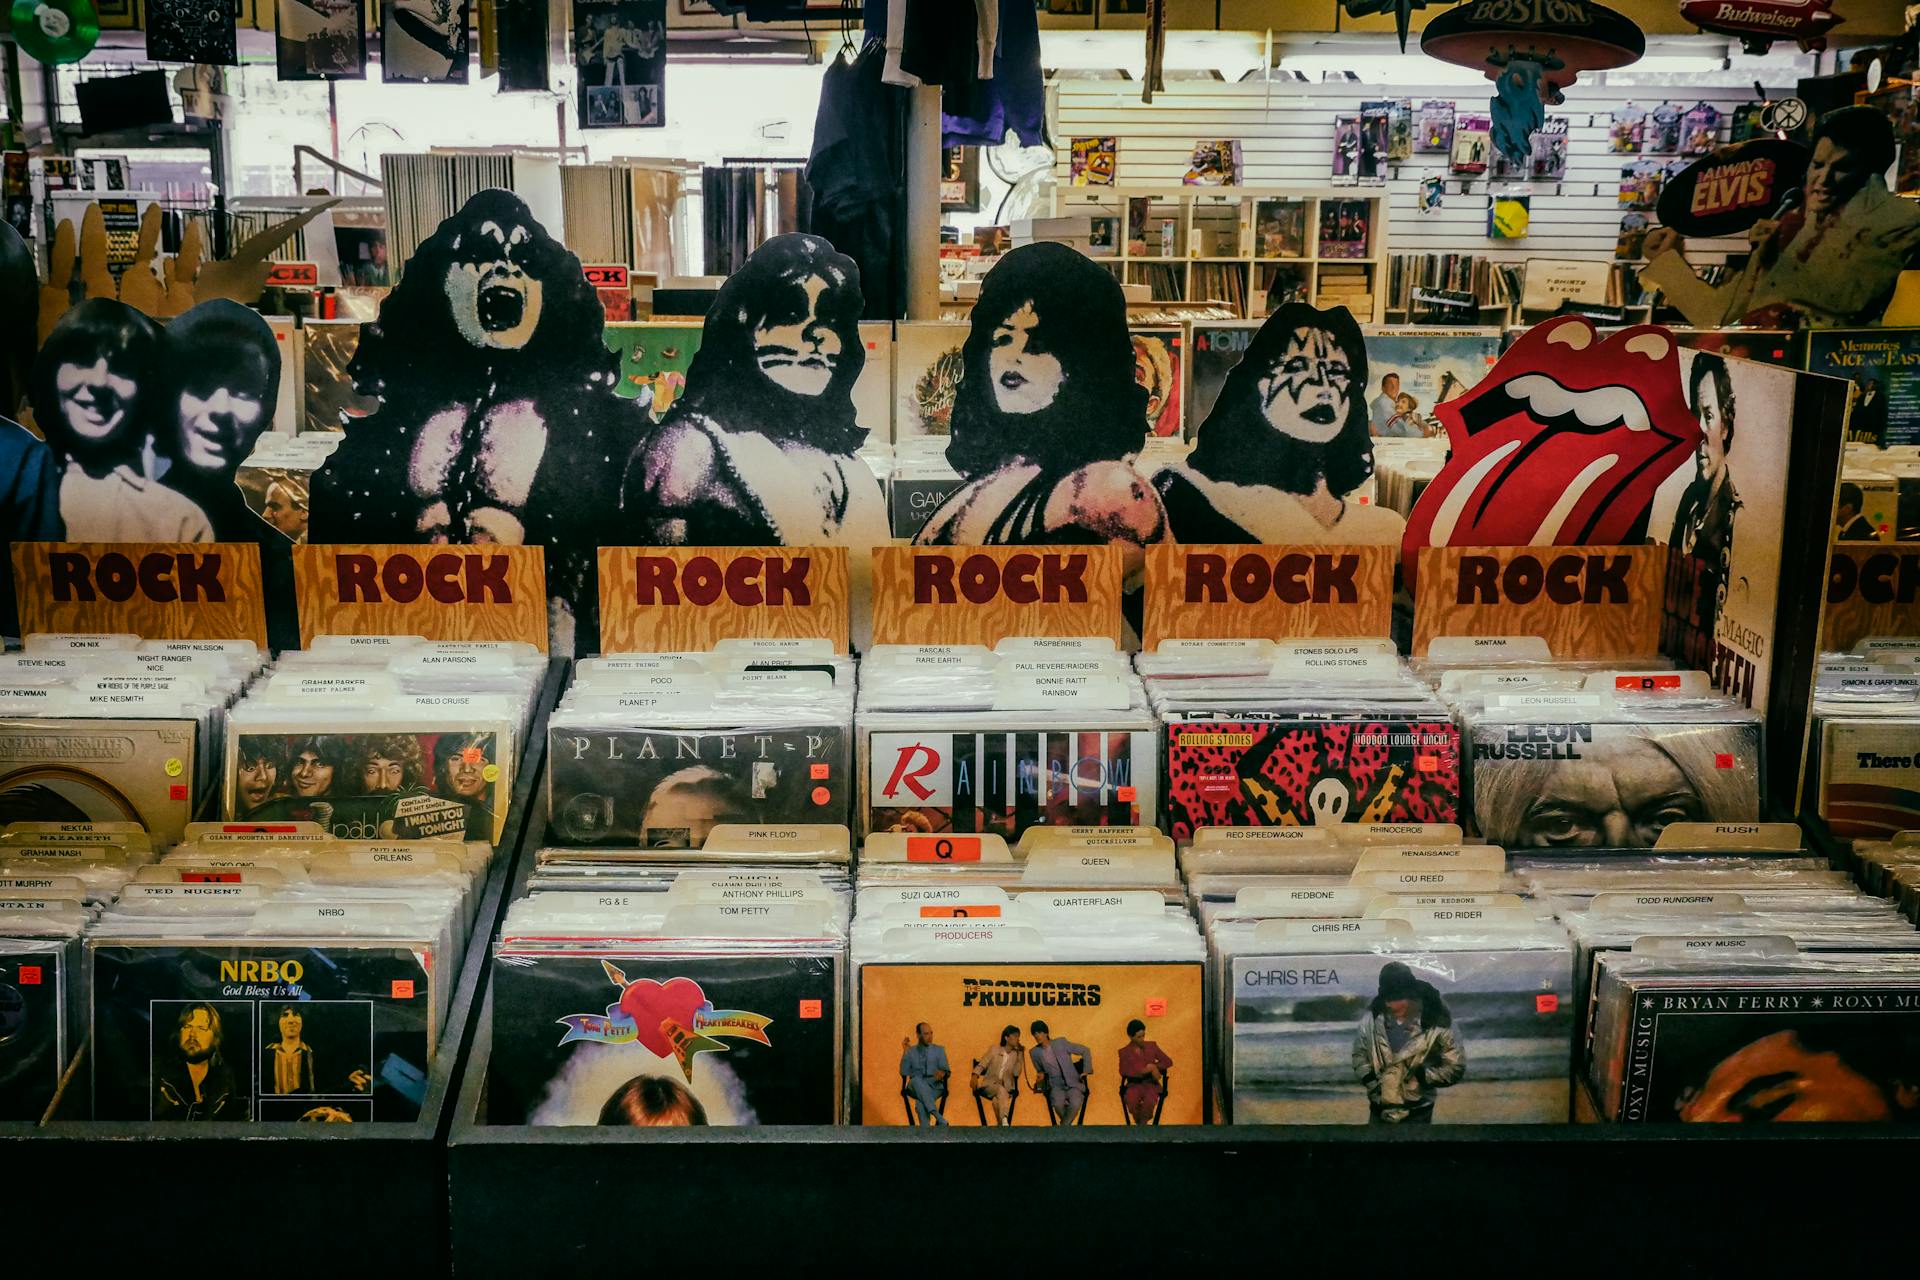 A shelf of rock music vinyl records and images of the bandmembers of Kiss at a music store